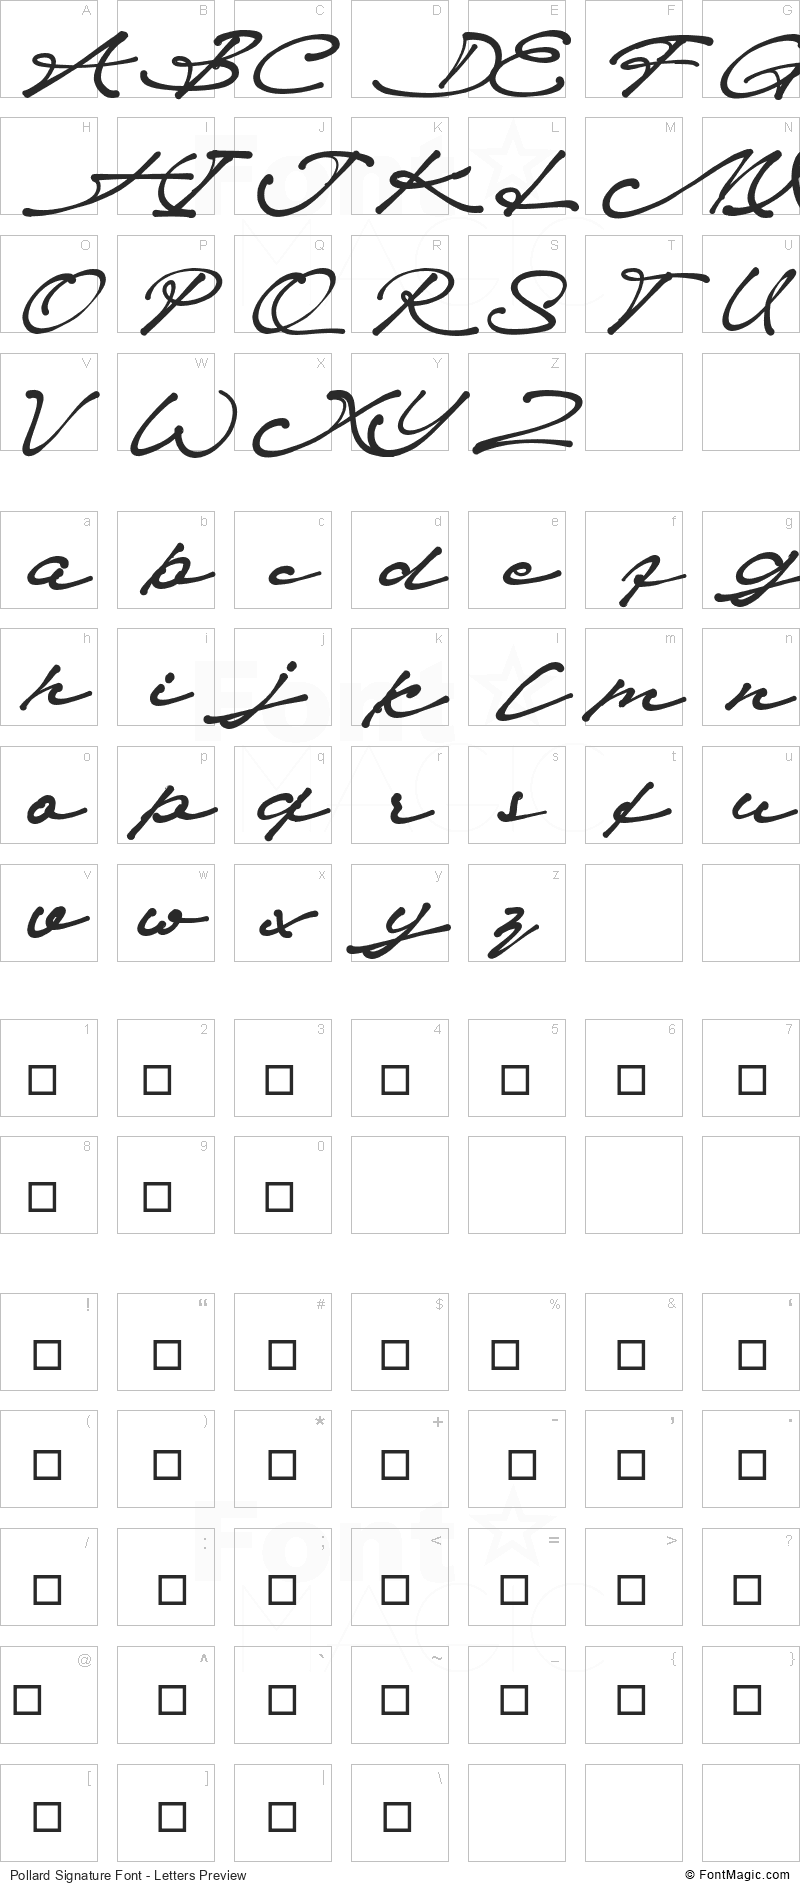 Pollard Signature Font - All Latters Preview Chart